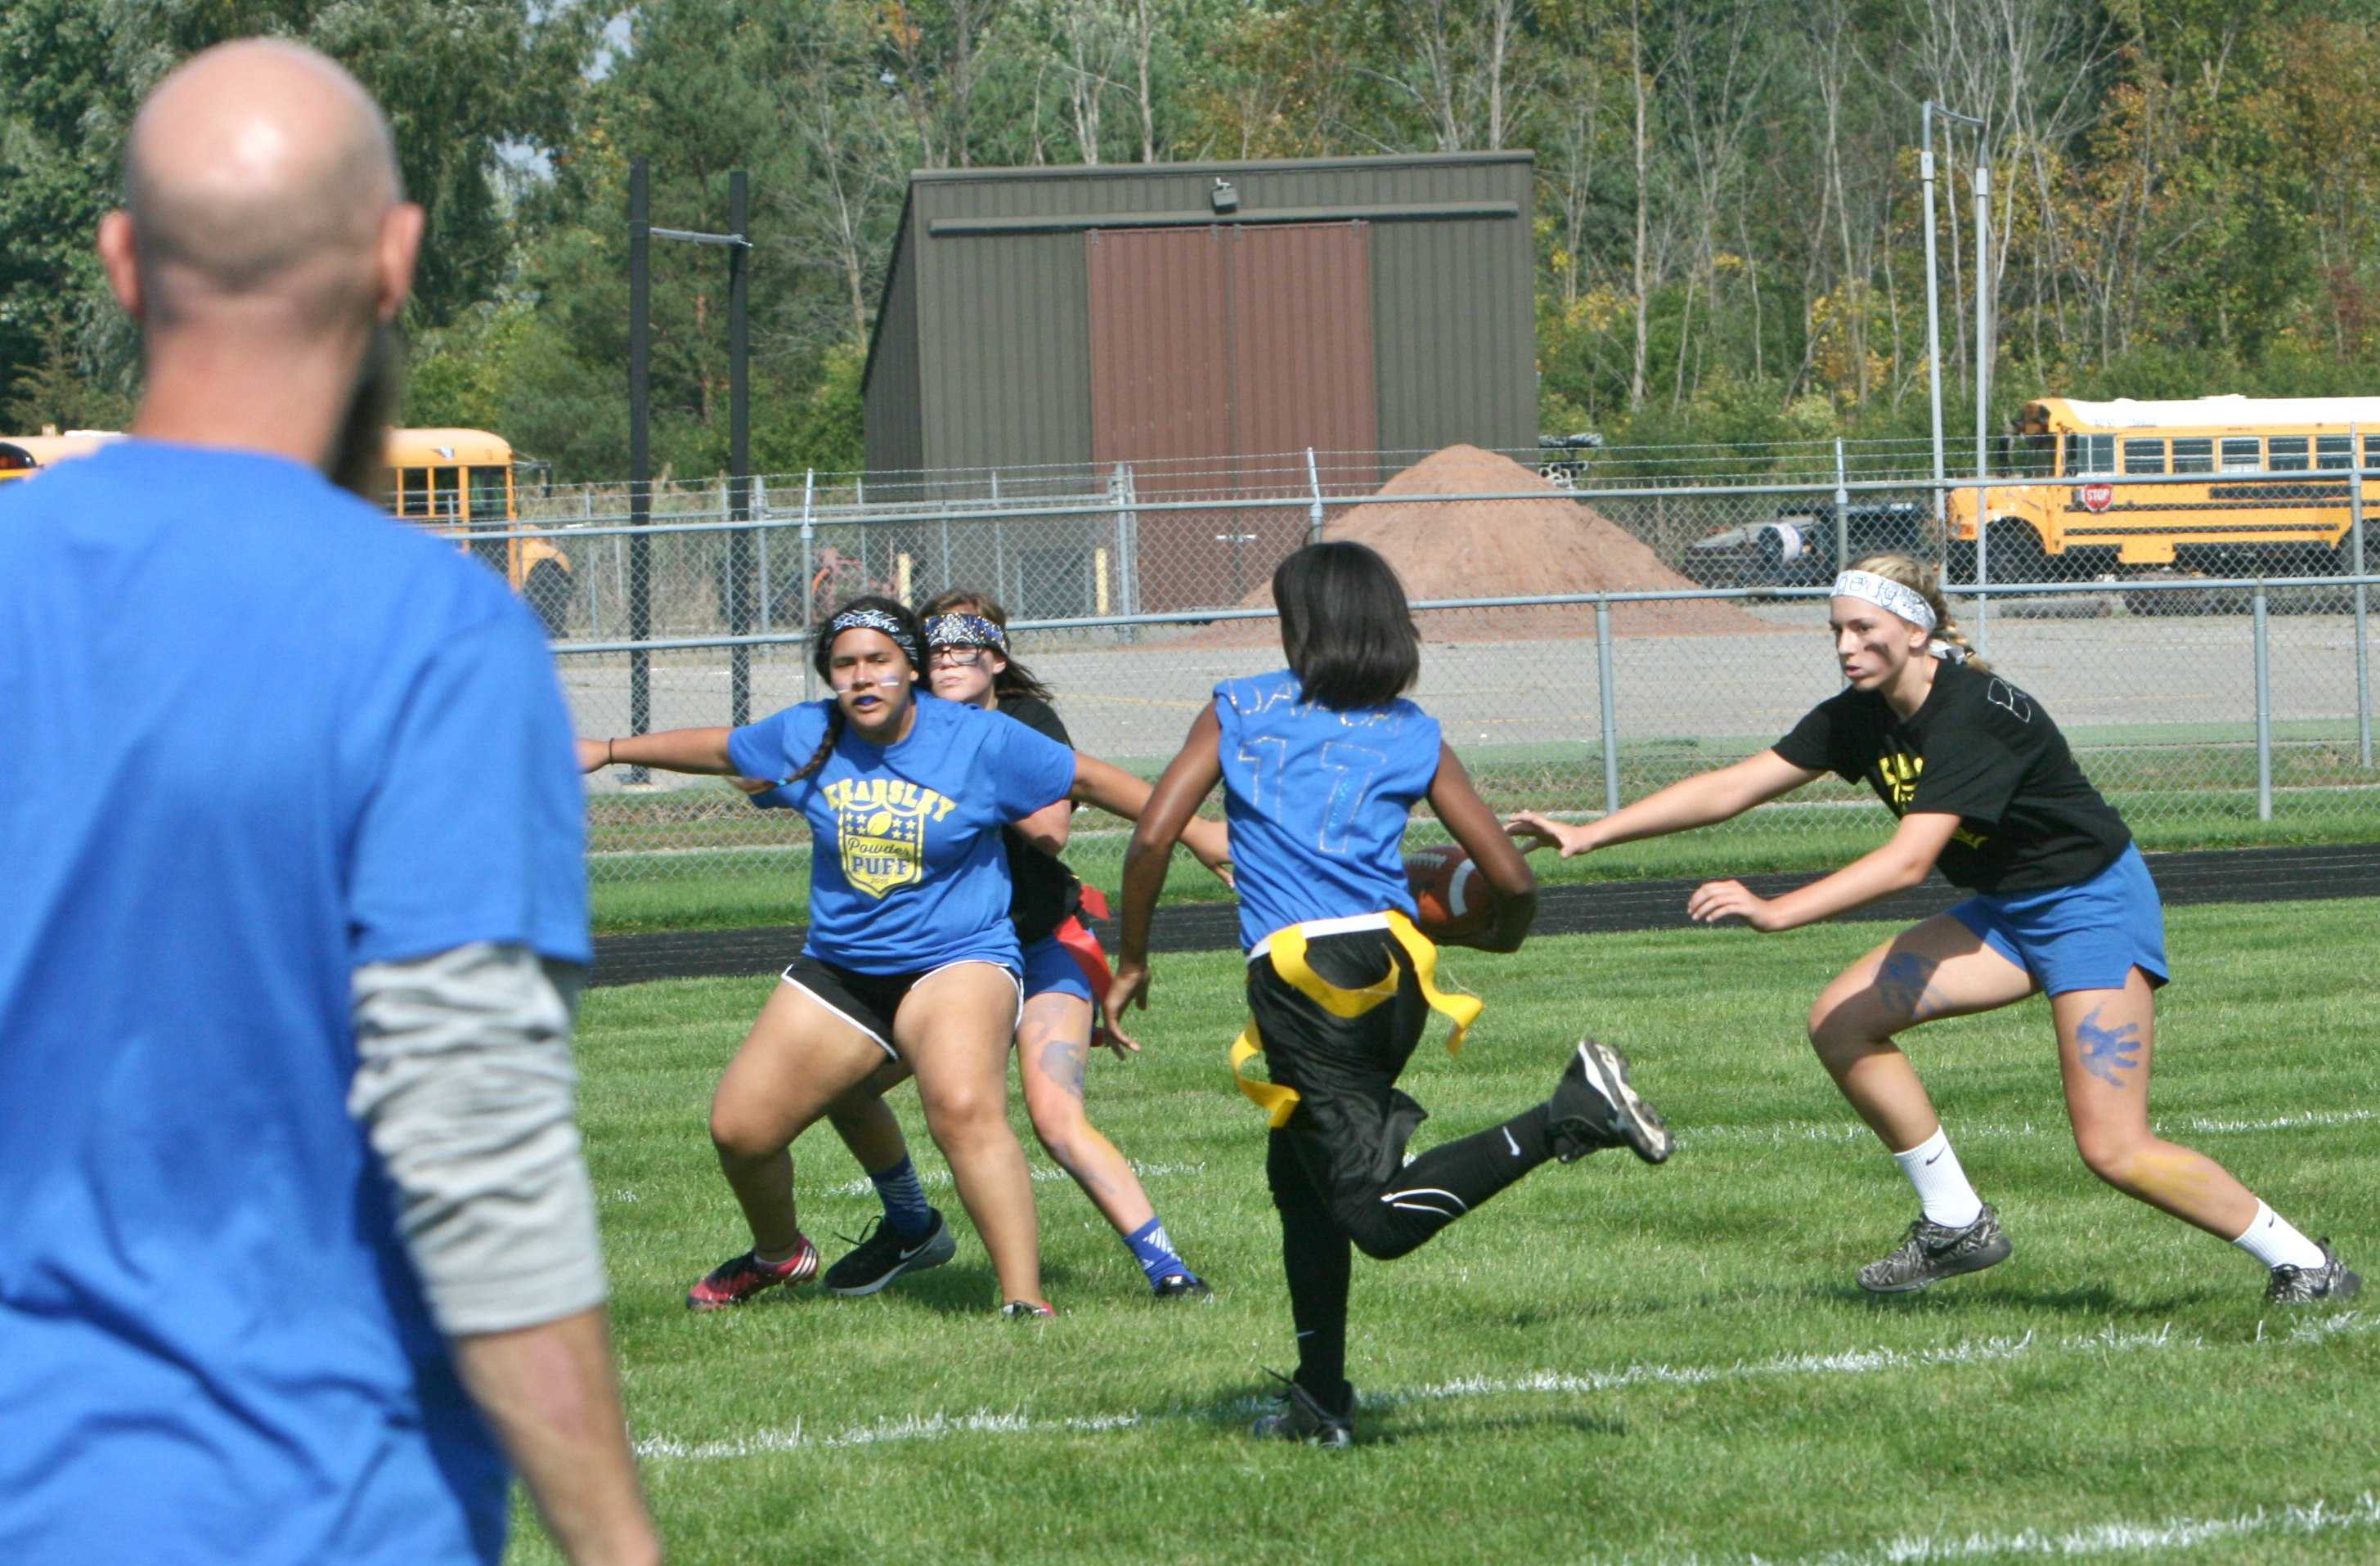 Senior Dajiana Simmons runs 5 yards for the winning touchdown while Tori Jones clears the path for her.